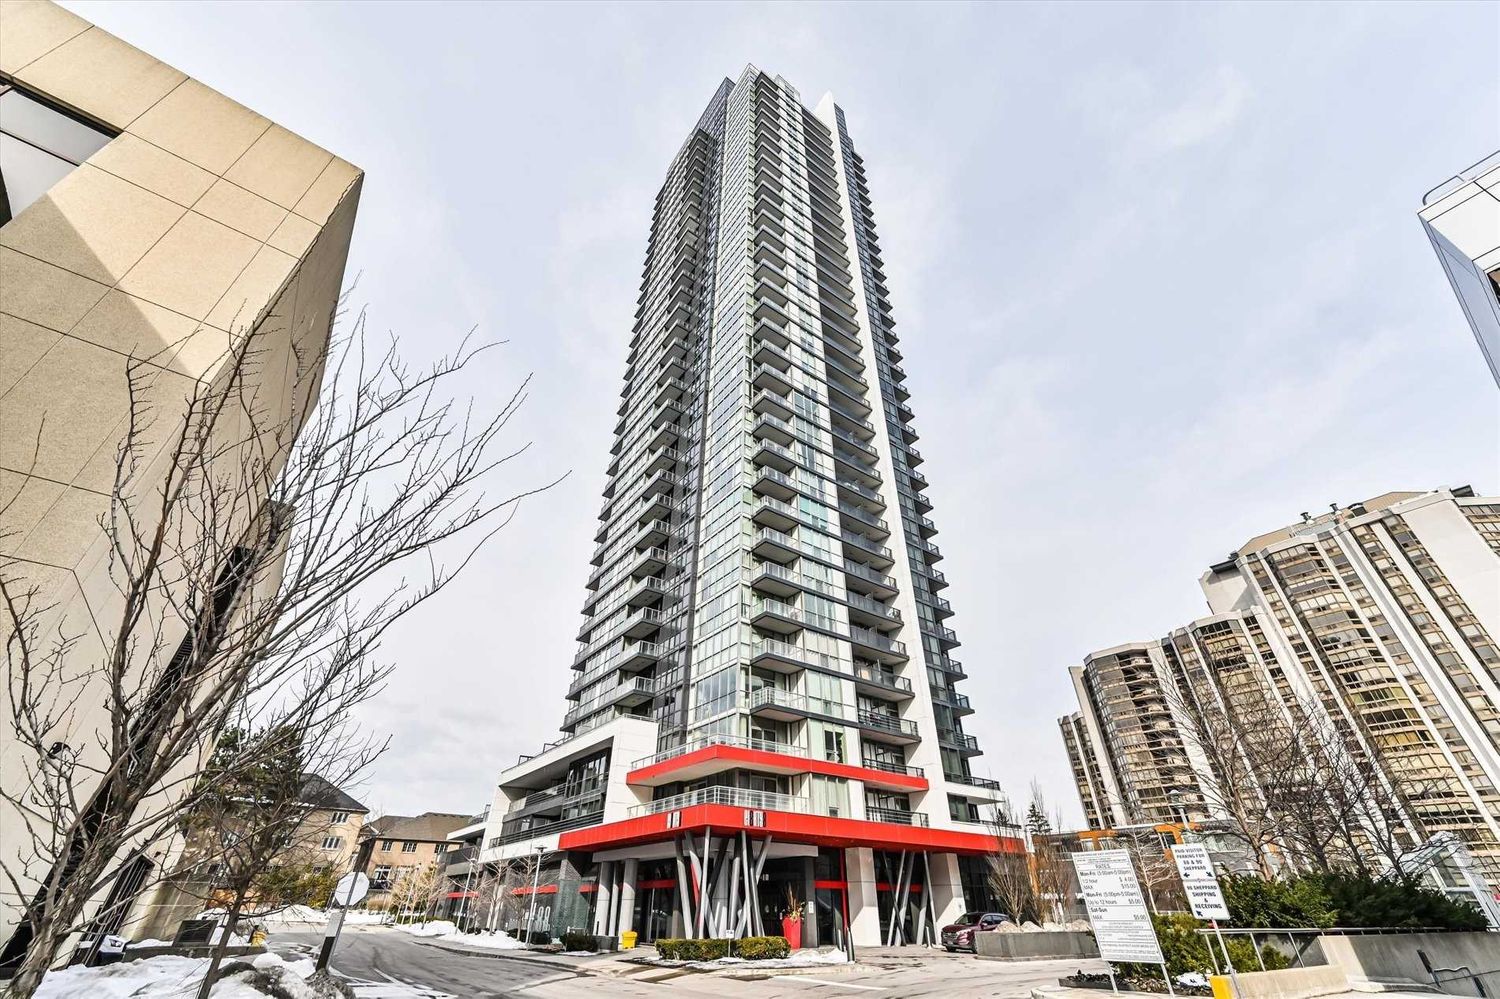 88 Sheppard Avenue E. EI8HTY8 Condos is located in  North York, Toronto - image #1 of 3